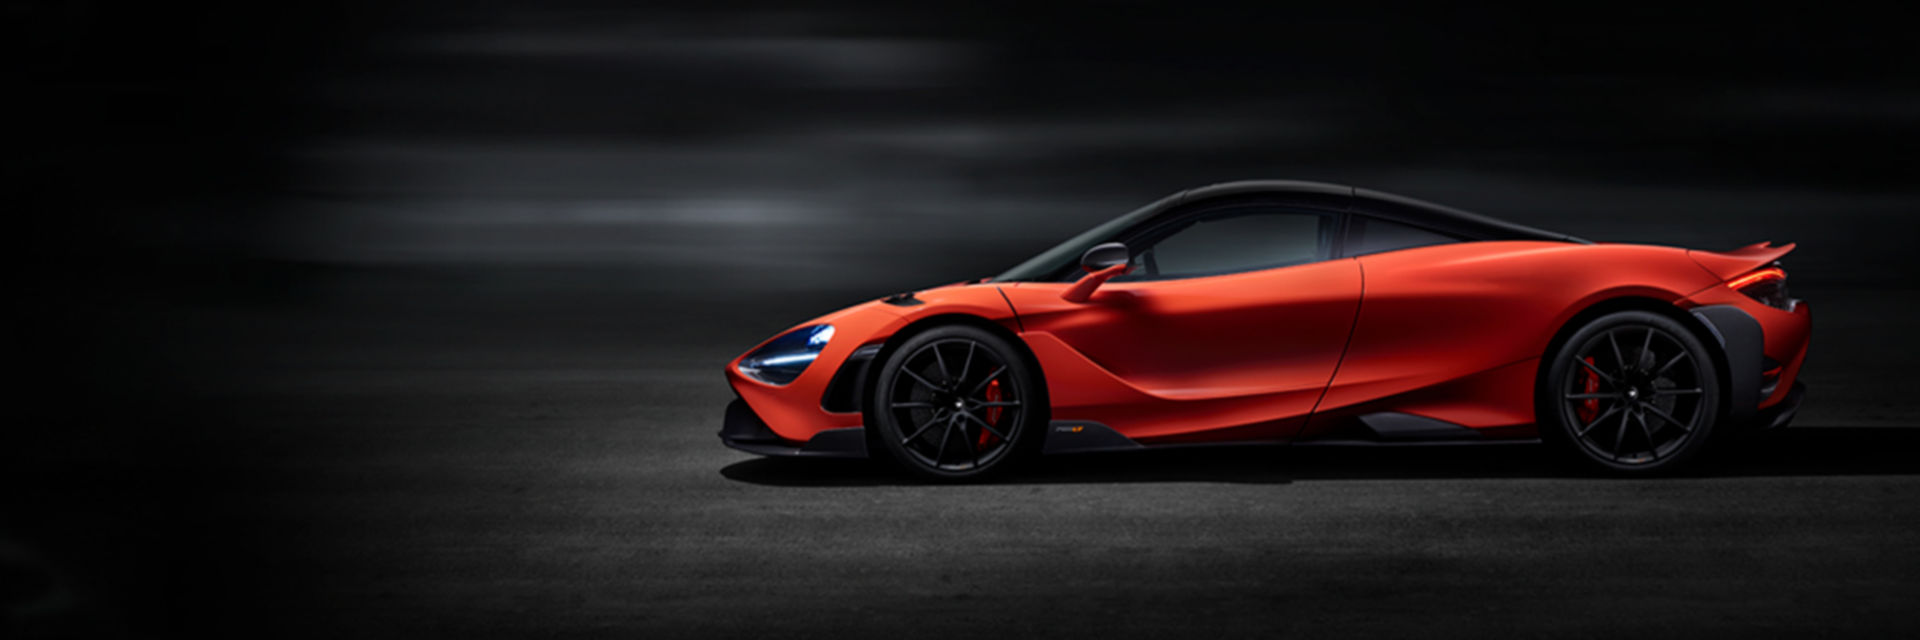 765LT Specification 